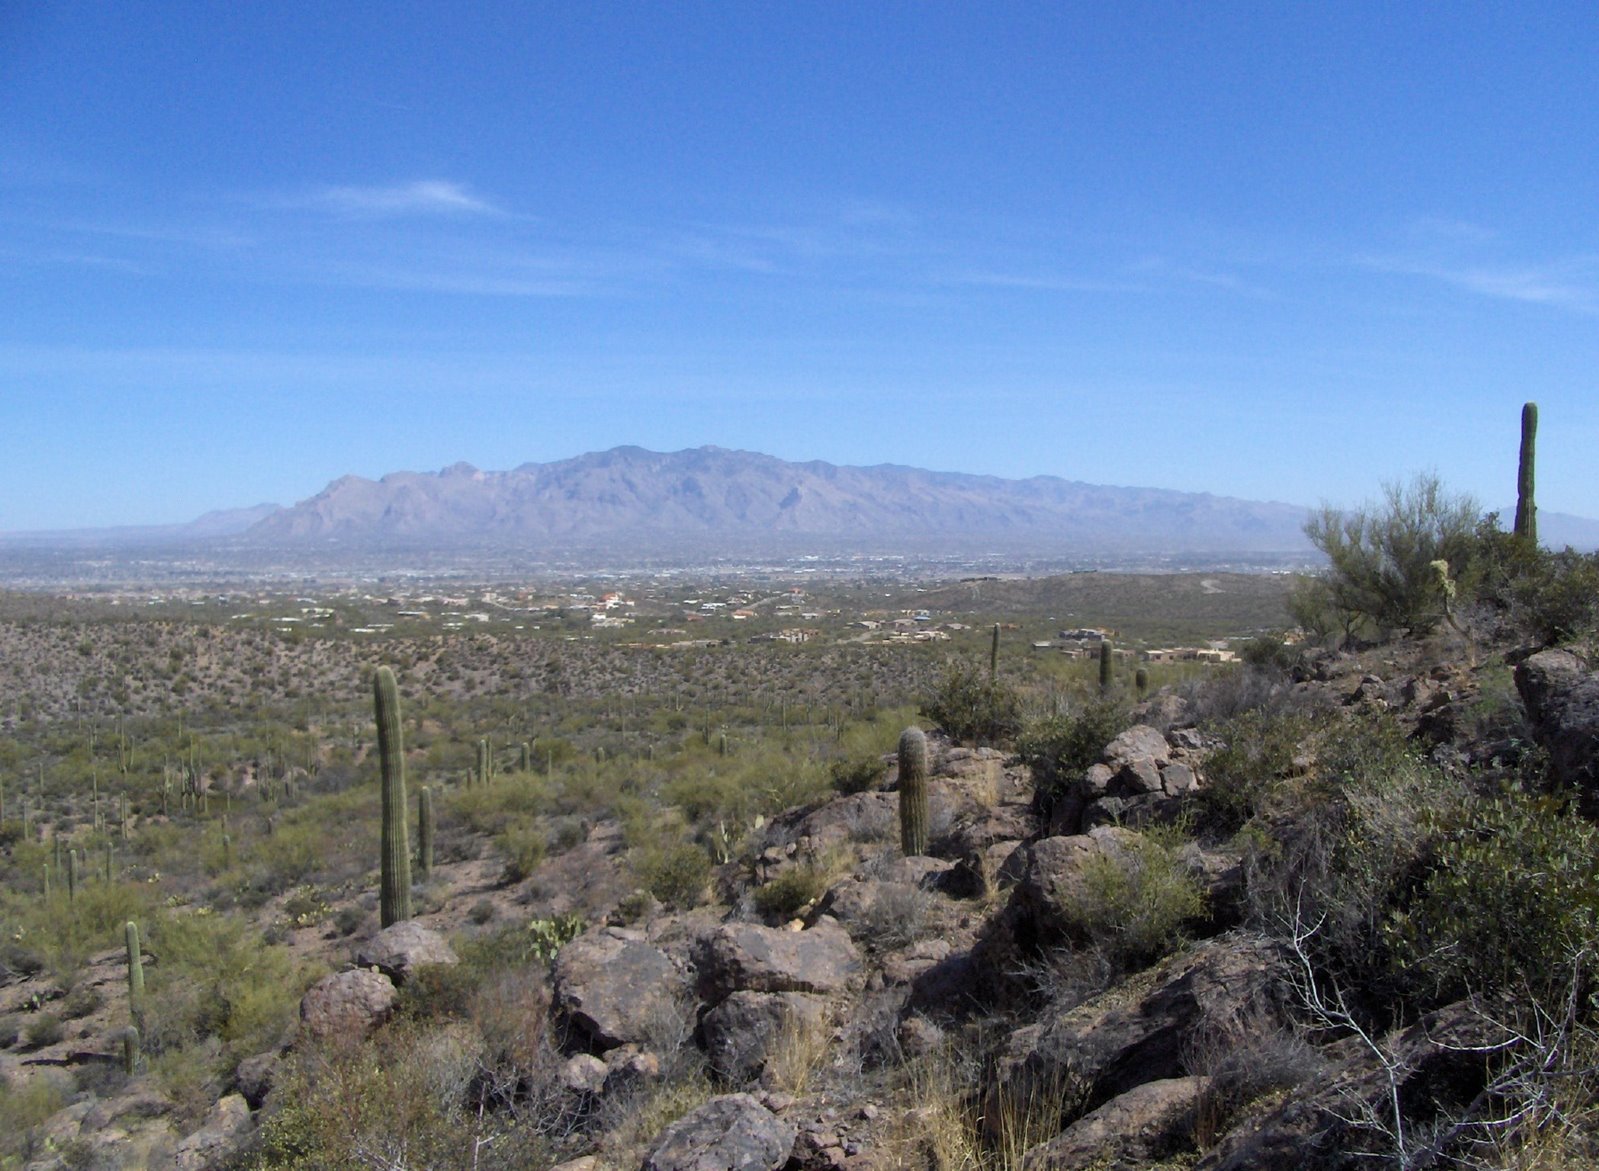 The City of Tucson as seen from the Tucson Mountains